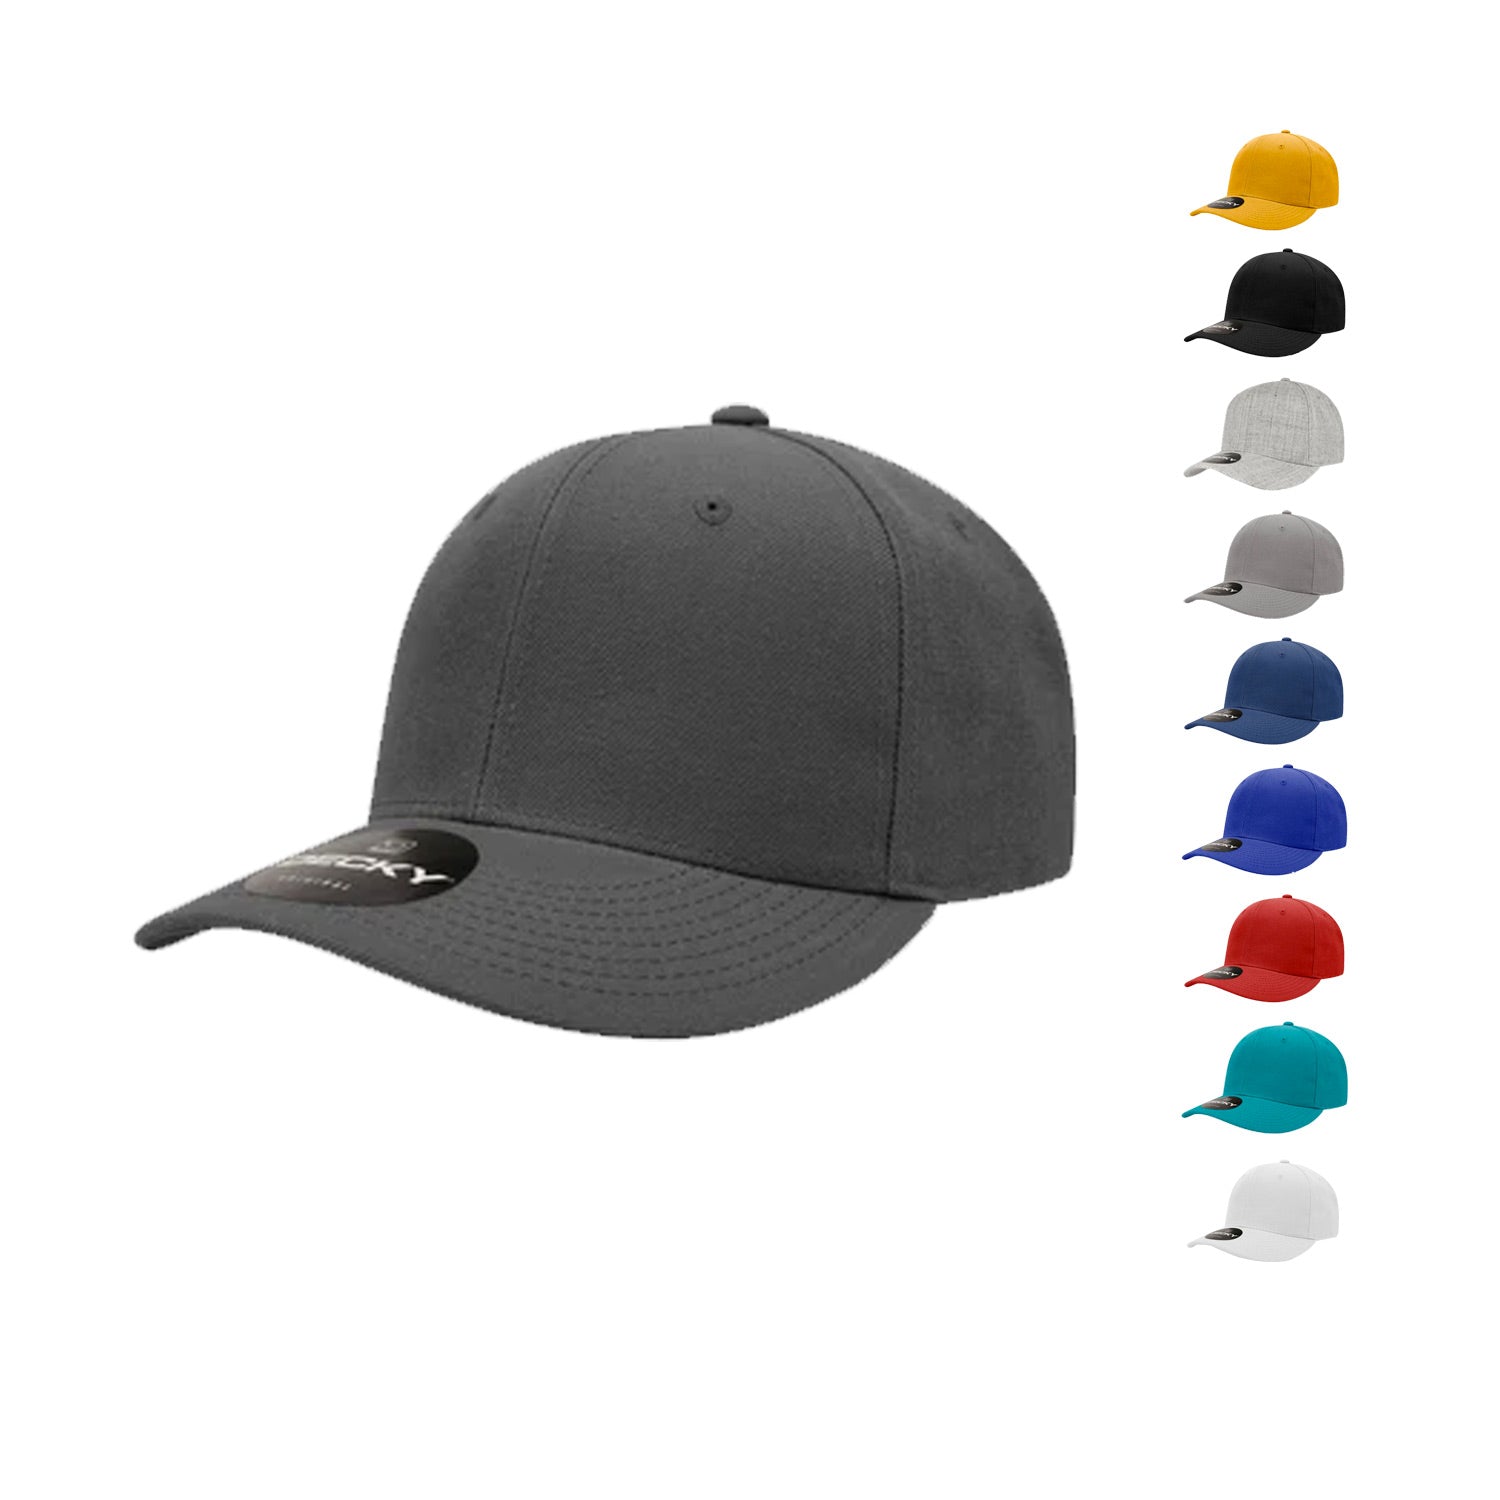 Decky 1040 Trucker Hats Caps Blank Snapback Profile 5 Panel Structured High